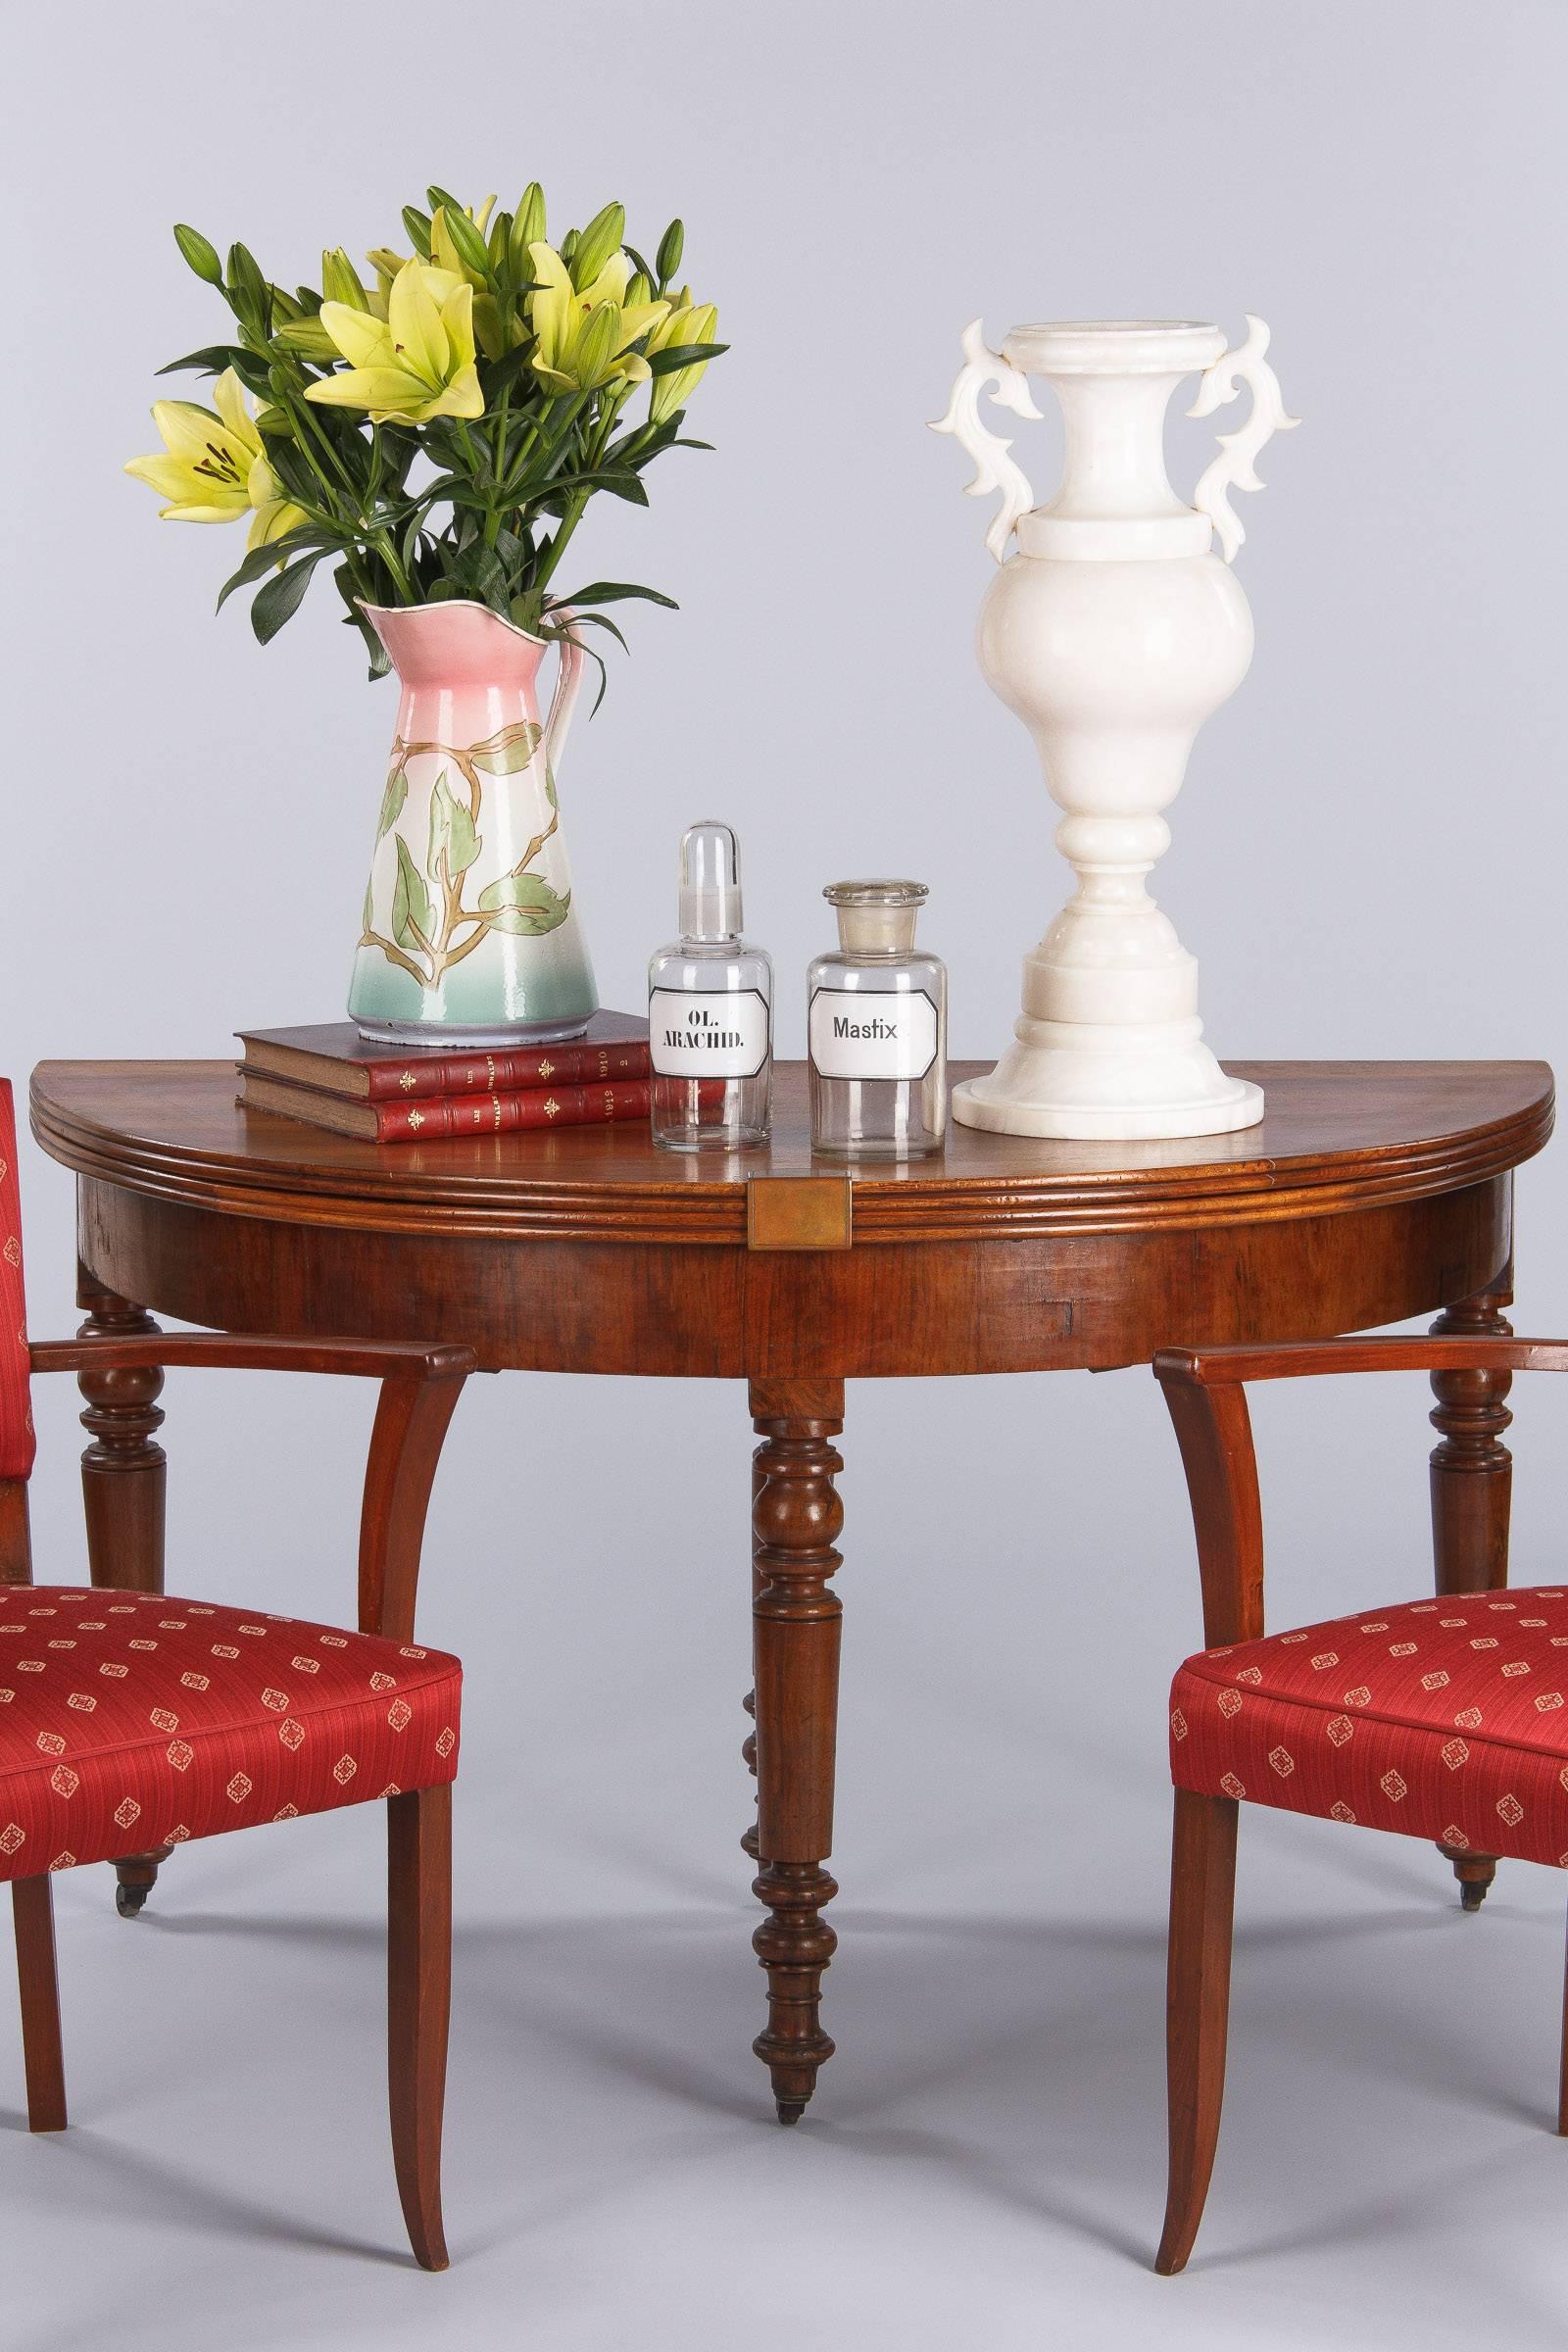 A handsome period Louis Philippe demilune table in French blond walnut that opens up to a round table of 50.75